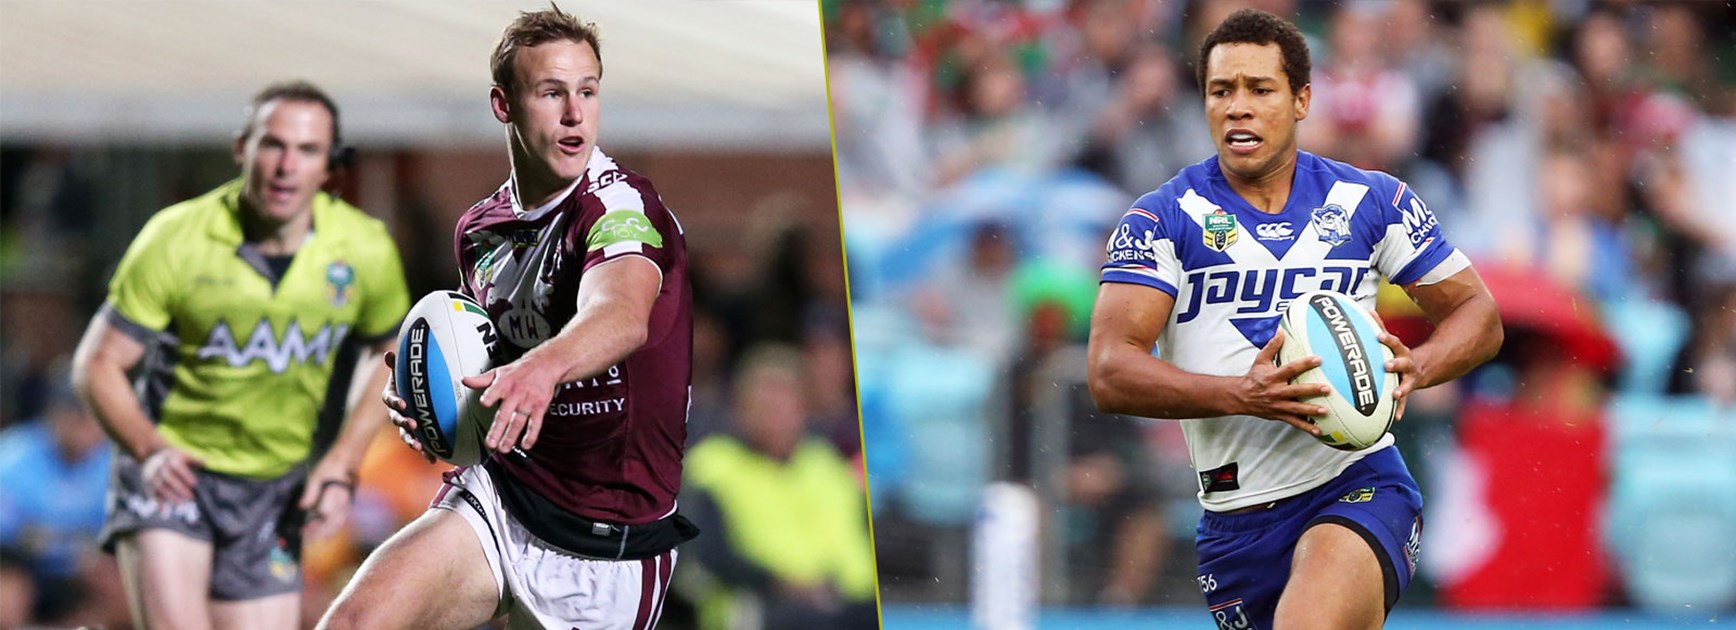 Manly star Daly Cherry-Evans and Bulldogs playmaker Moses Mbye will both find themselves under pressure to carry their team this season.